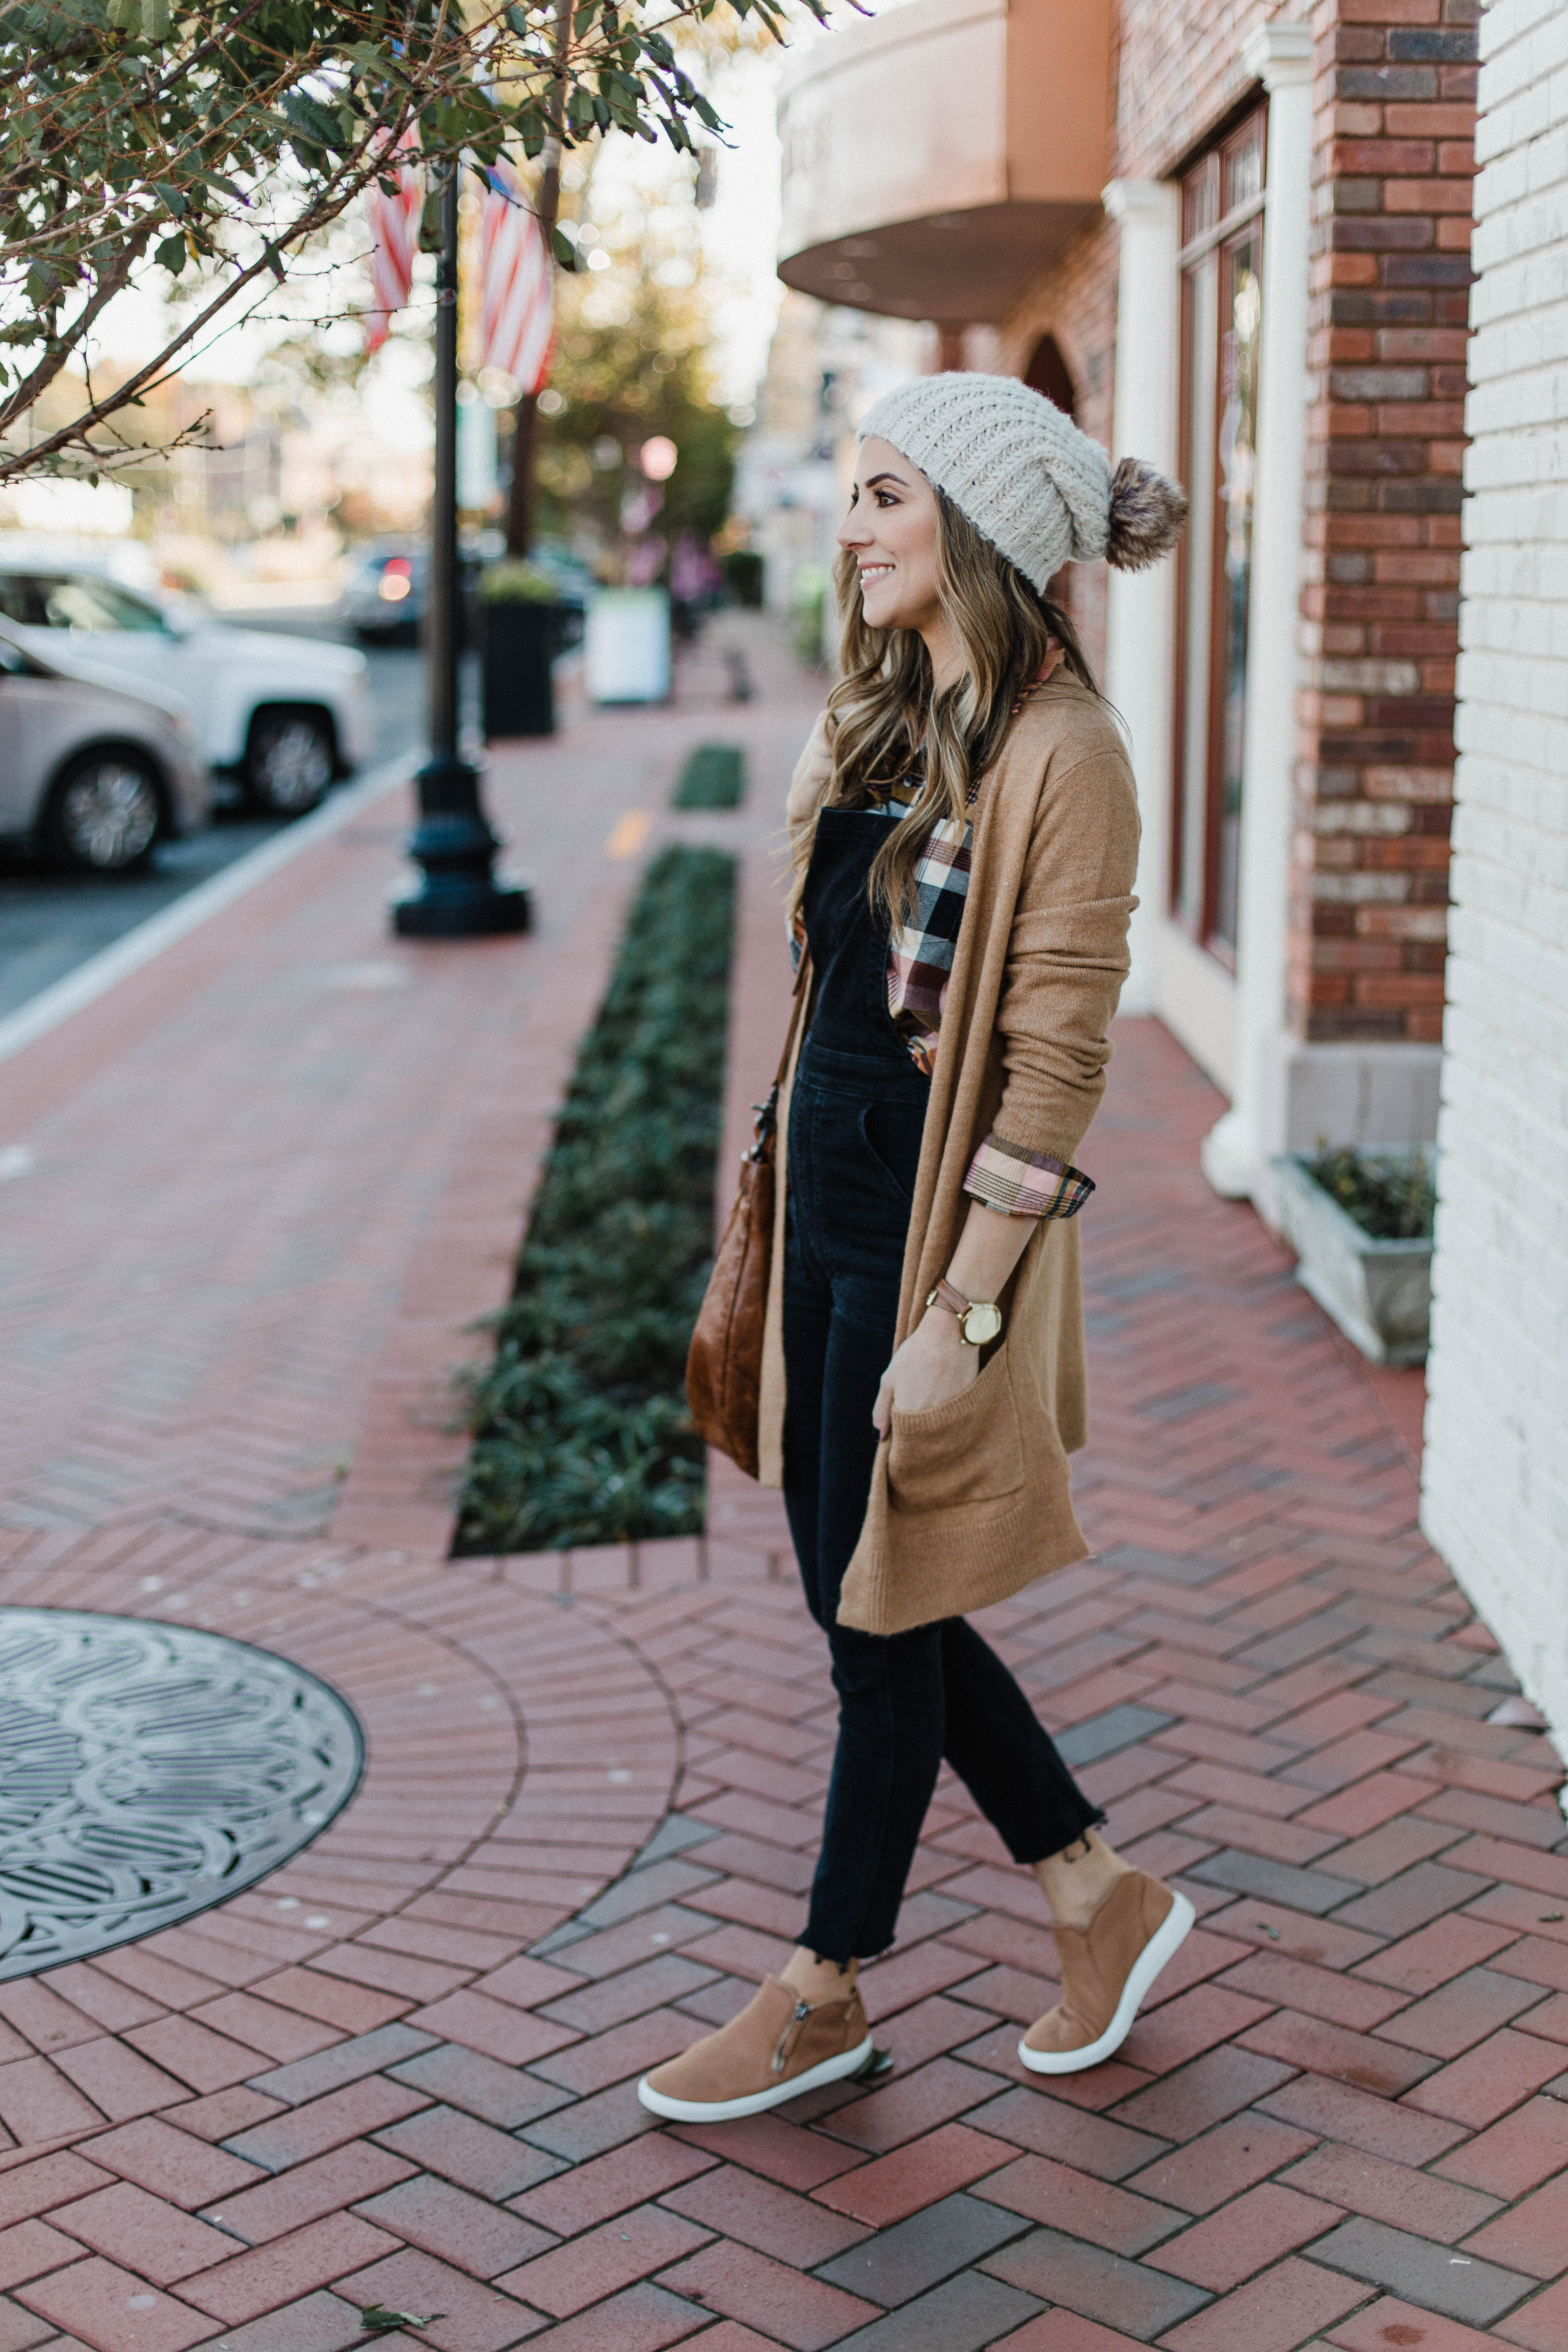 Connecticut life and style blogger Lauren McBride shares the best casual sneakers for comfort - an investment shoe for your wardrobe if you're looking for a high quality, long lasting par of sneakers. 